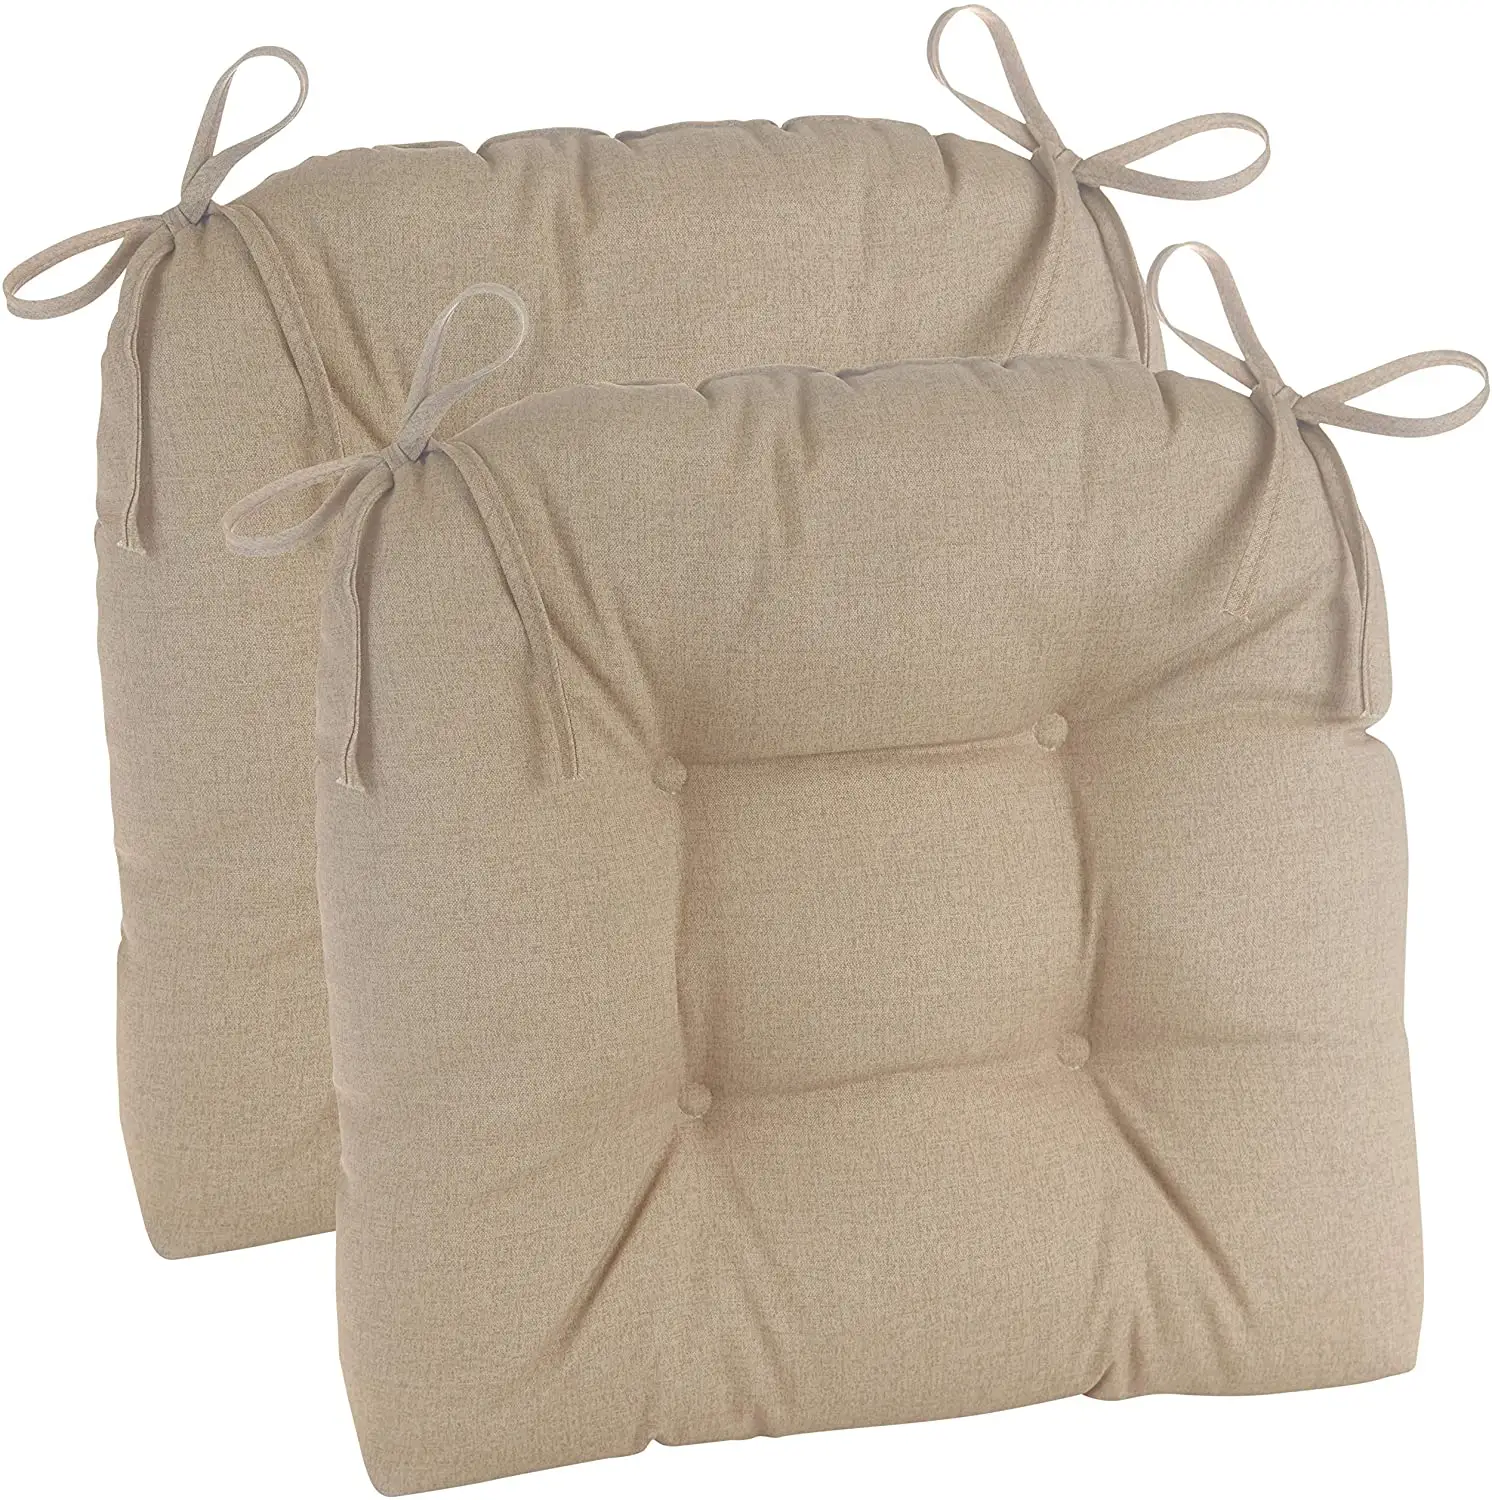 Outdoor Patio Cushions with Straps Water-Resistant Tufted Square Furniture Cushion Floor Pillow Office Chairs Pad